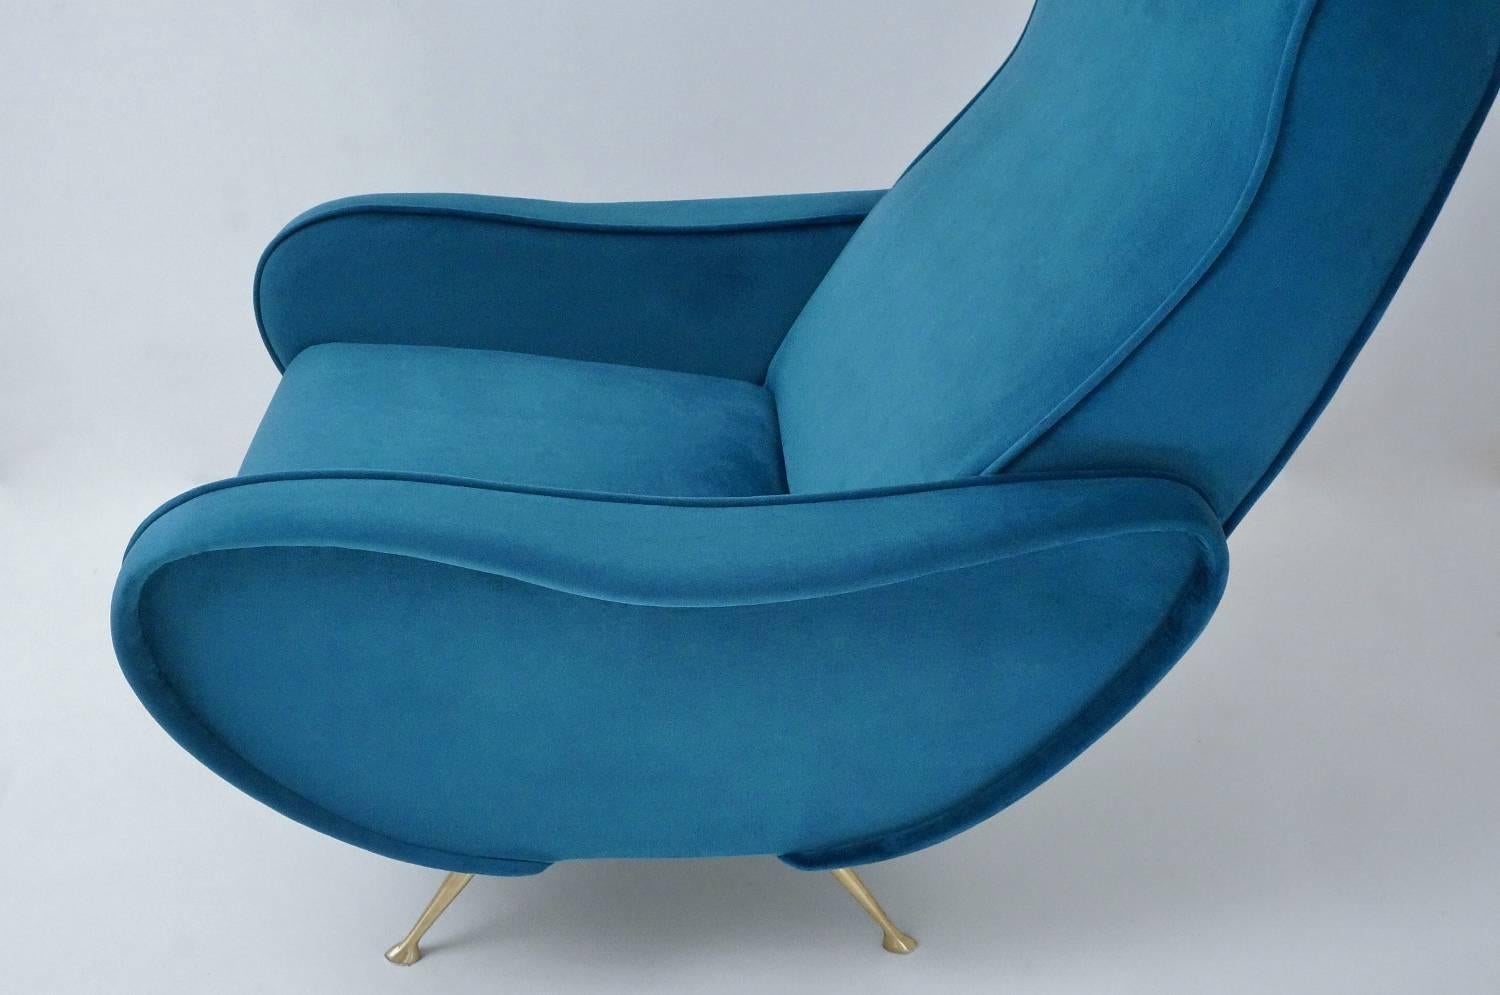 1950s Style Armchair Newly Made to Order in 25 Colors,  Italian For Sale 6